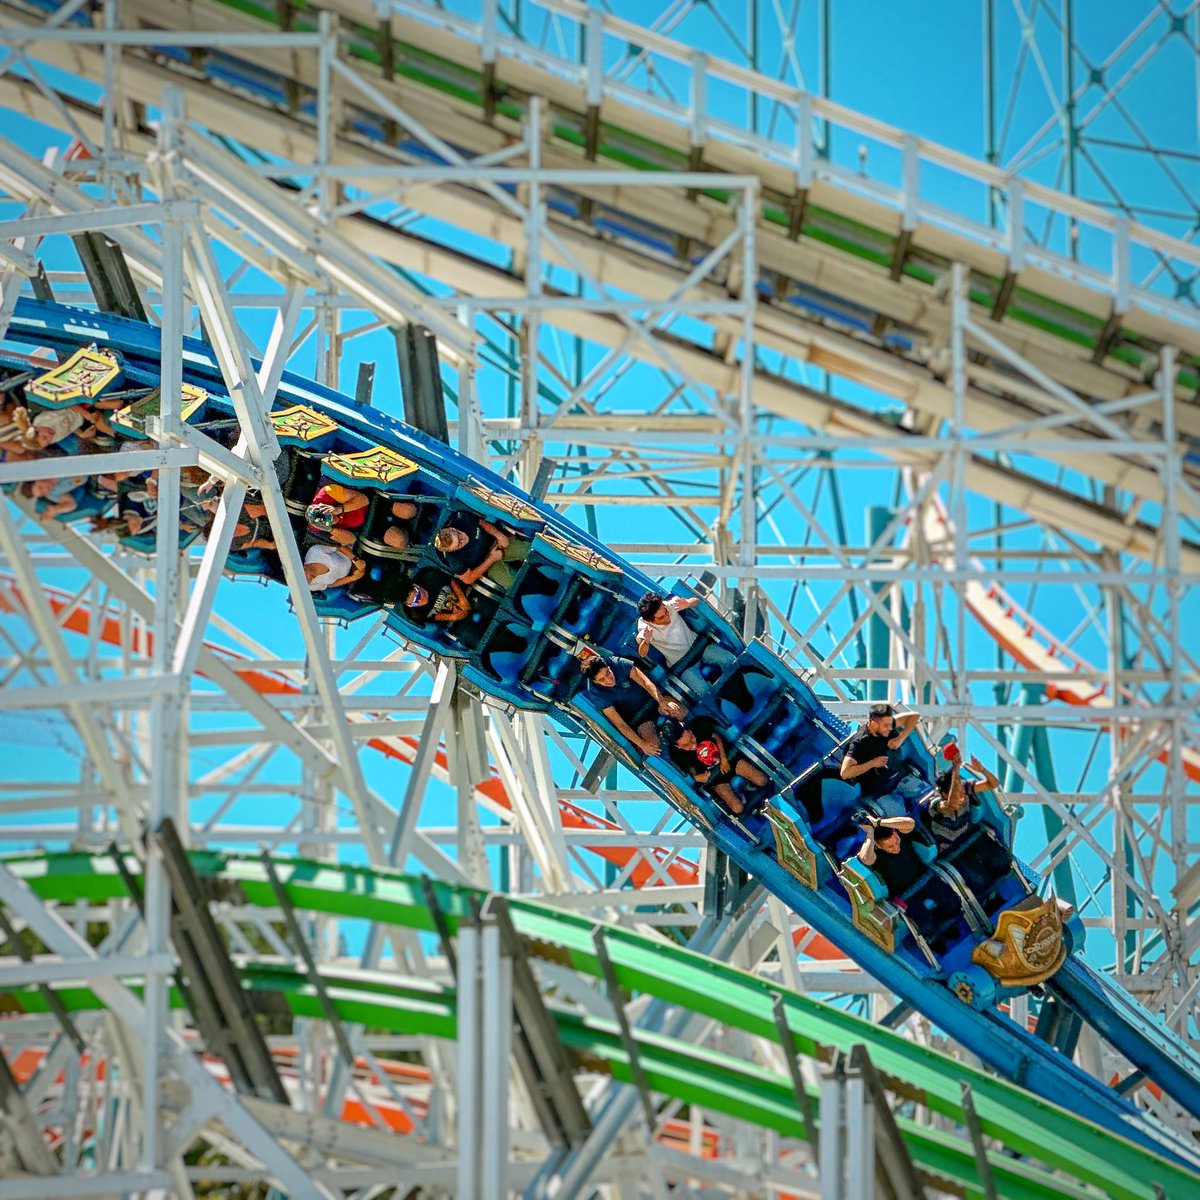 Twisted Colossus at Six Flags Magic Mountain! 

#twistedcolossus #sixflags #sixflagsmagicmountain #rmc #themepark #rollercoaster #amusementpark #coasterenthusiast #thrillride #photography